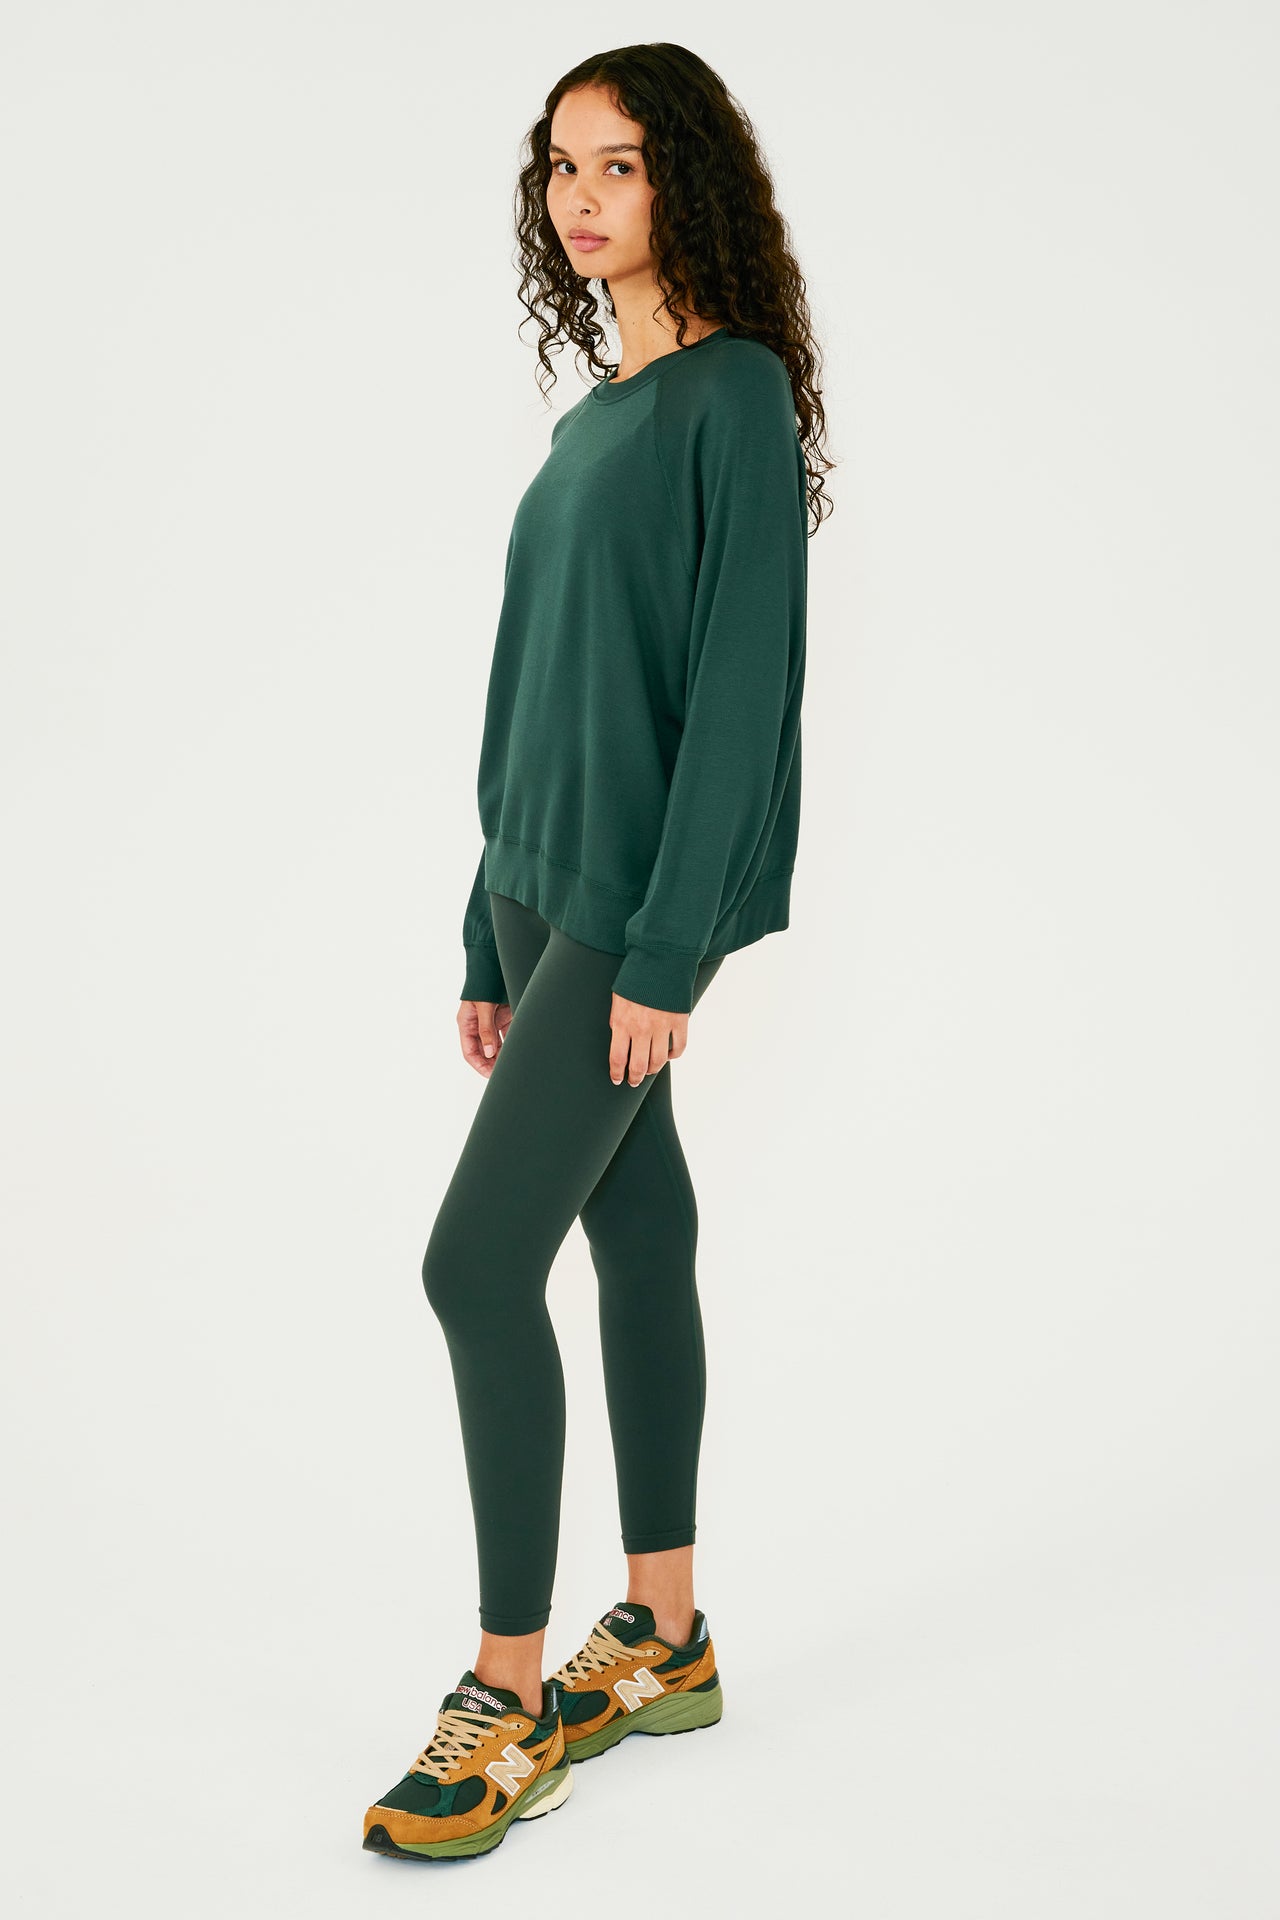 Full side view of girl wearing dark green sweatshirt with visible stitching and ribbed hem, with dark green leggings and multi colored shoes